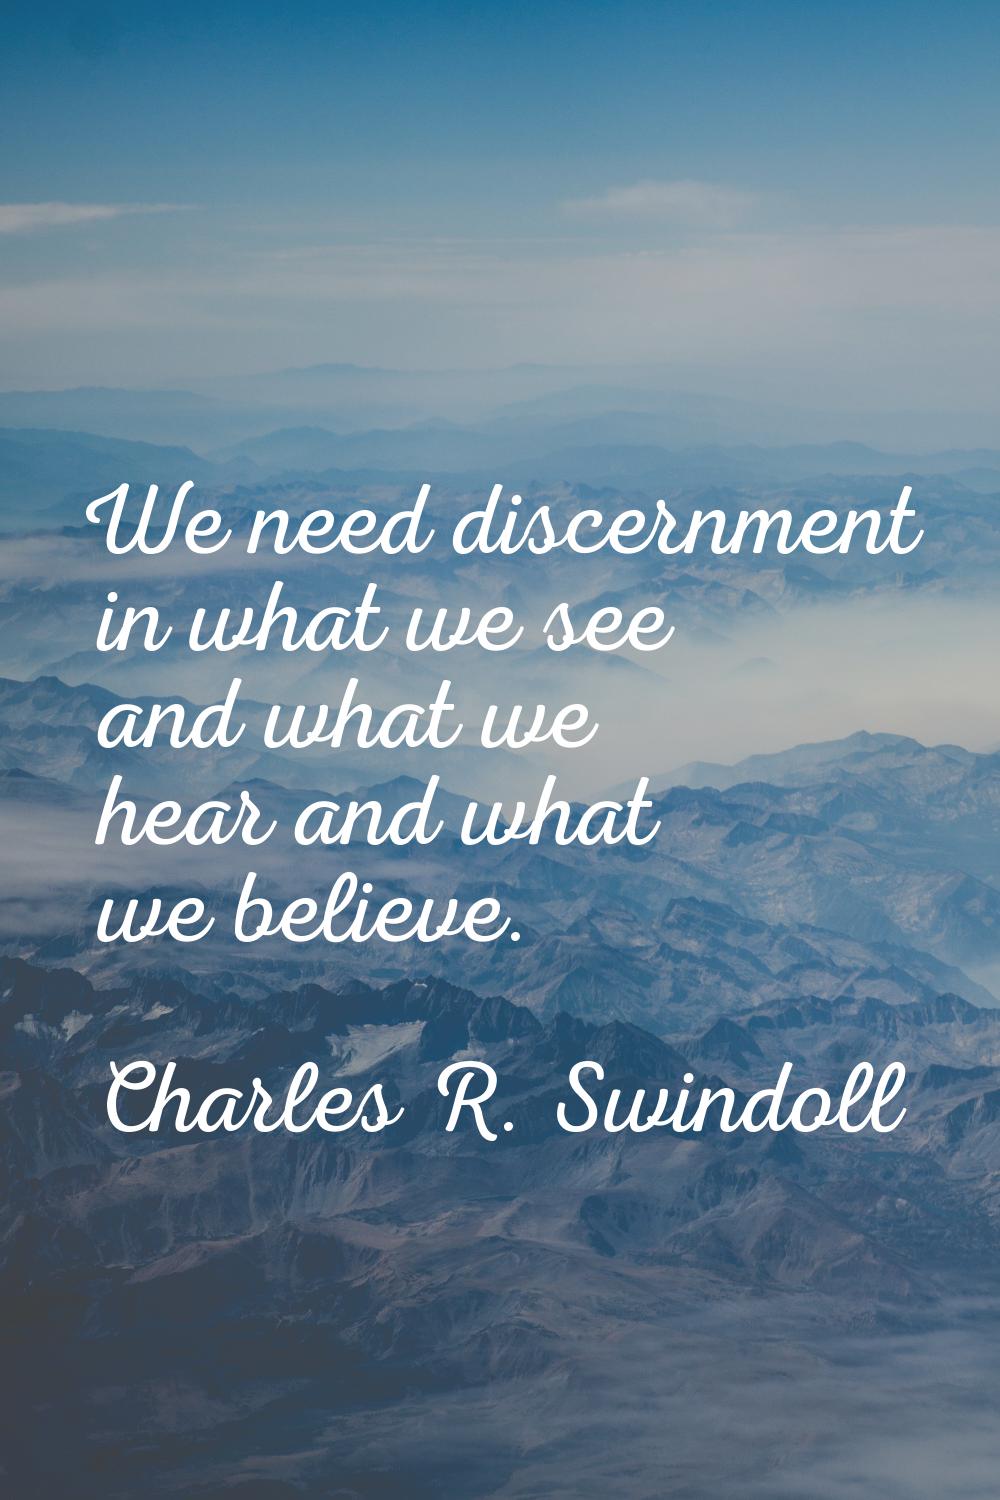 We need discernment in what we see and what we hear and what we believe.